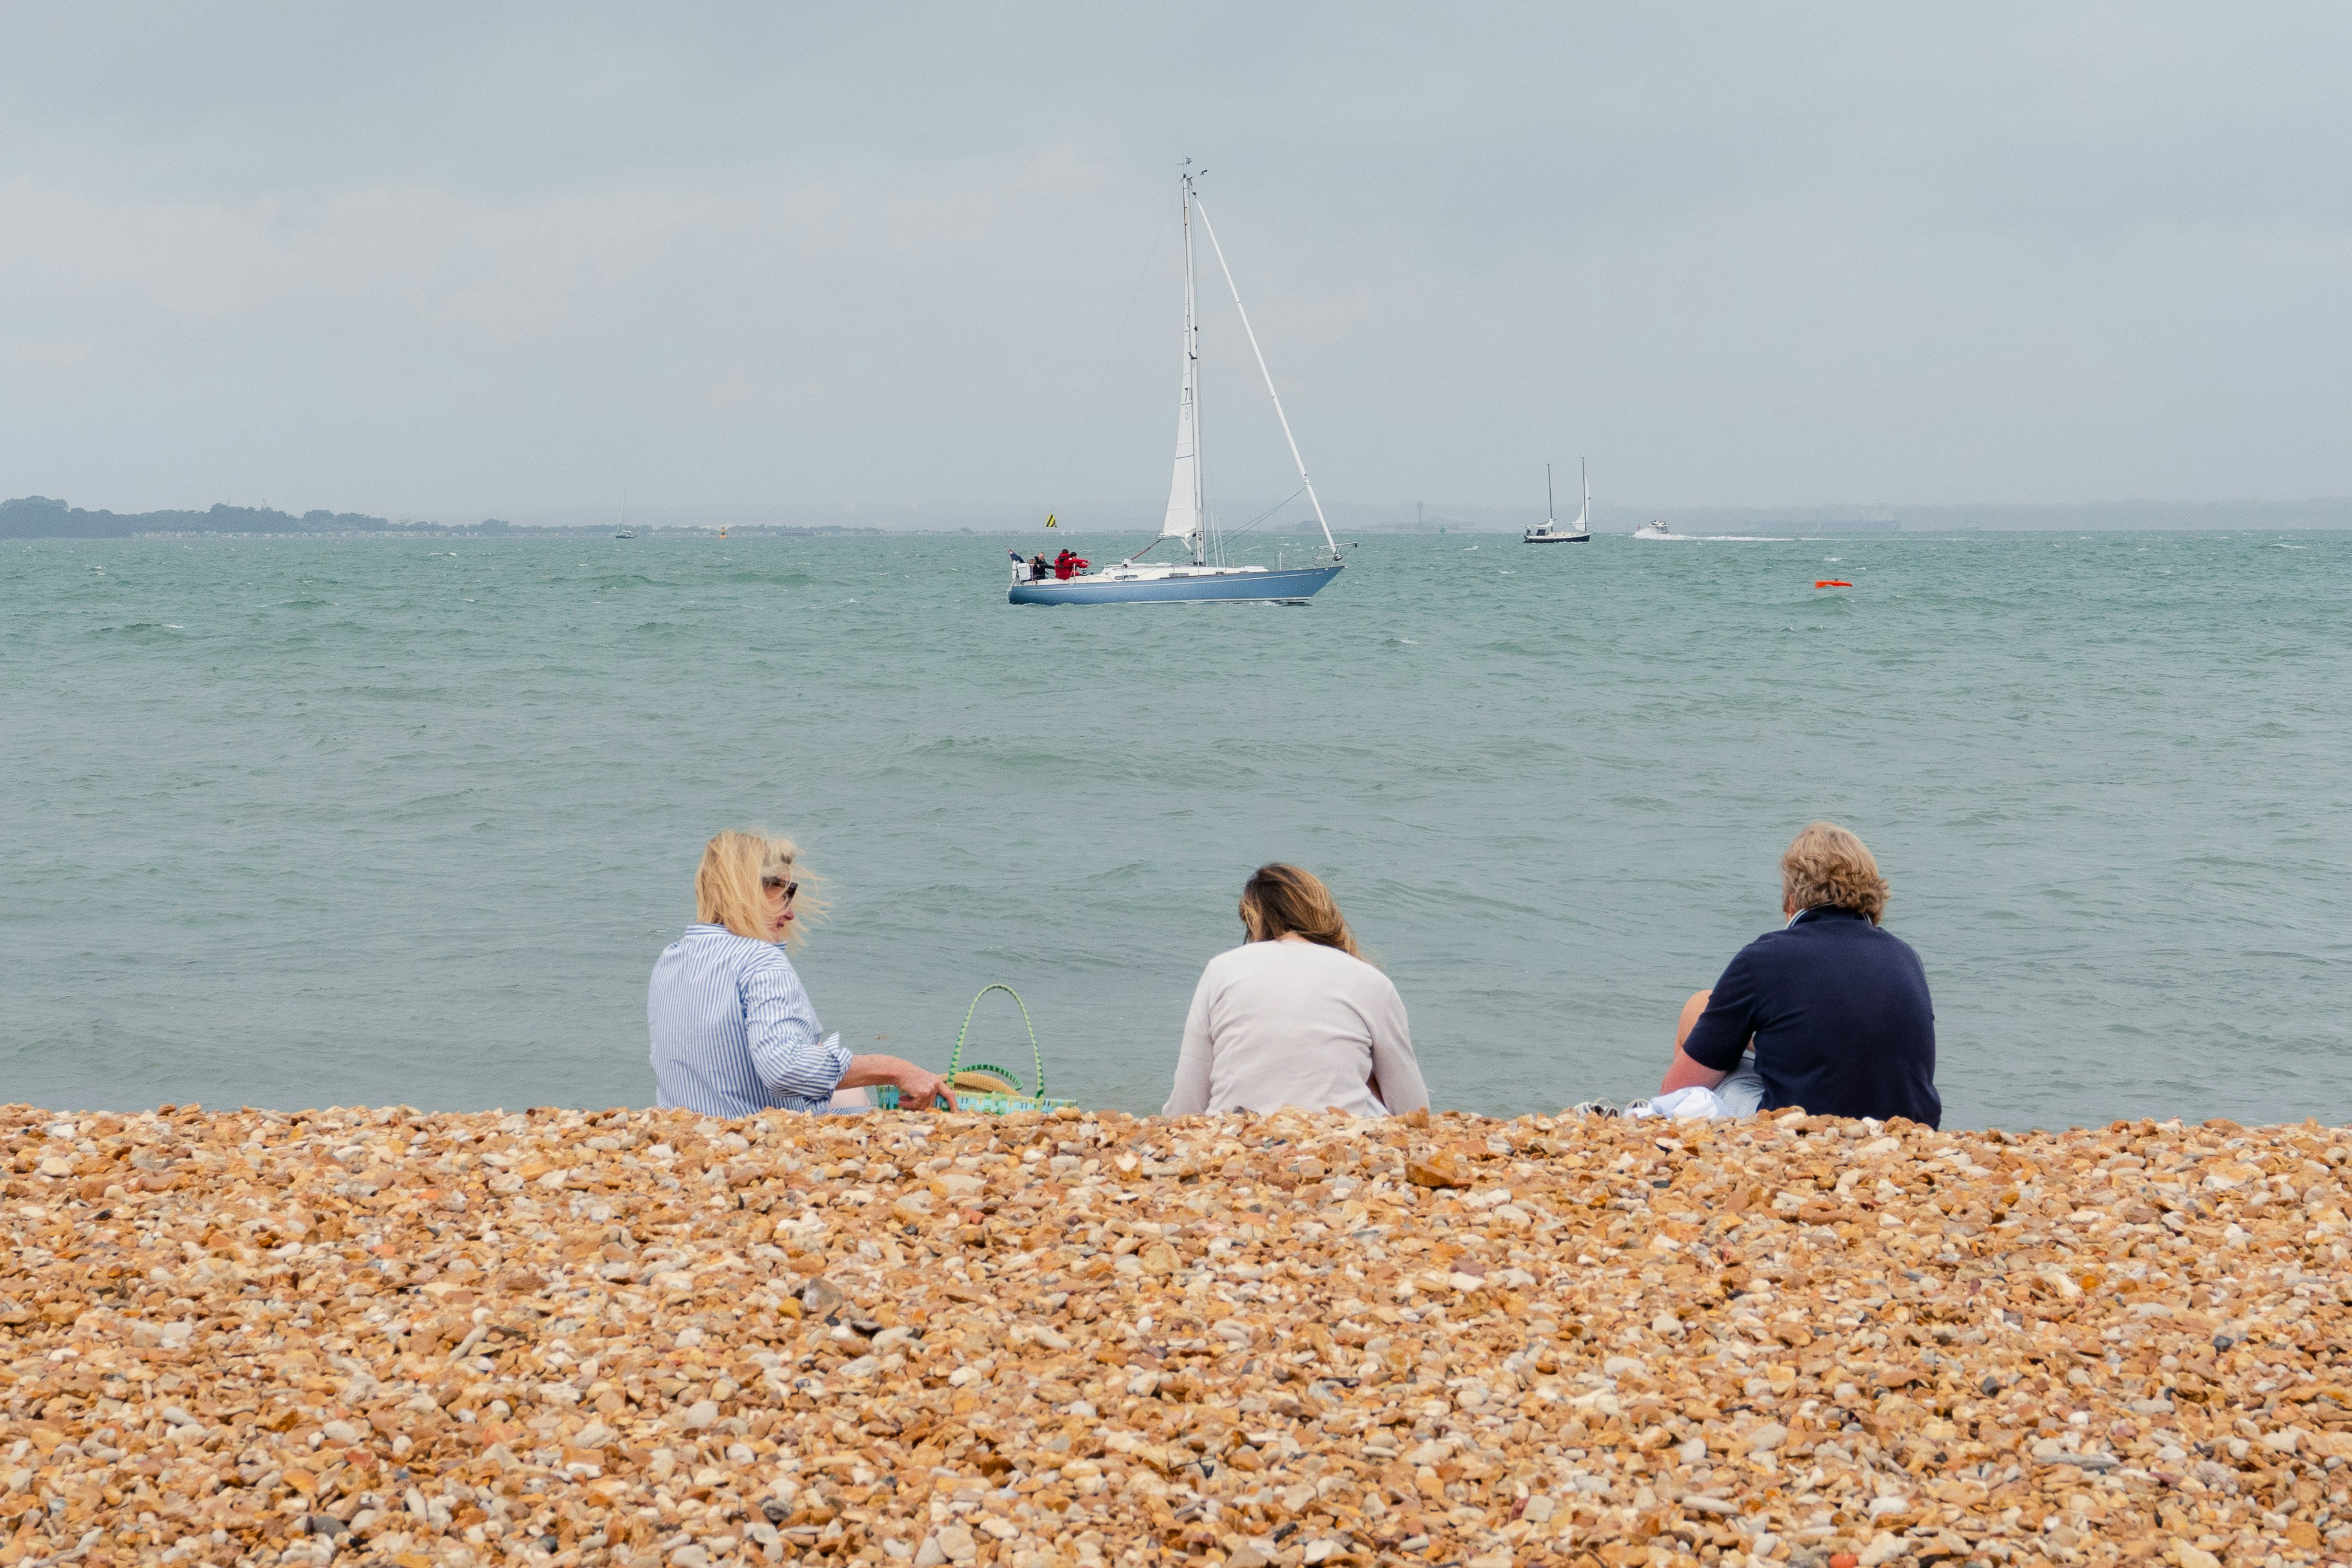 Three friends enjoy the view of the Solent on a Sunday.